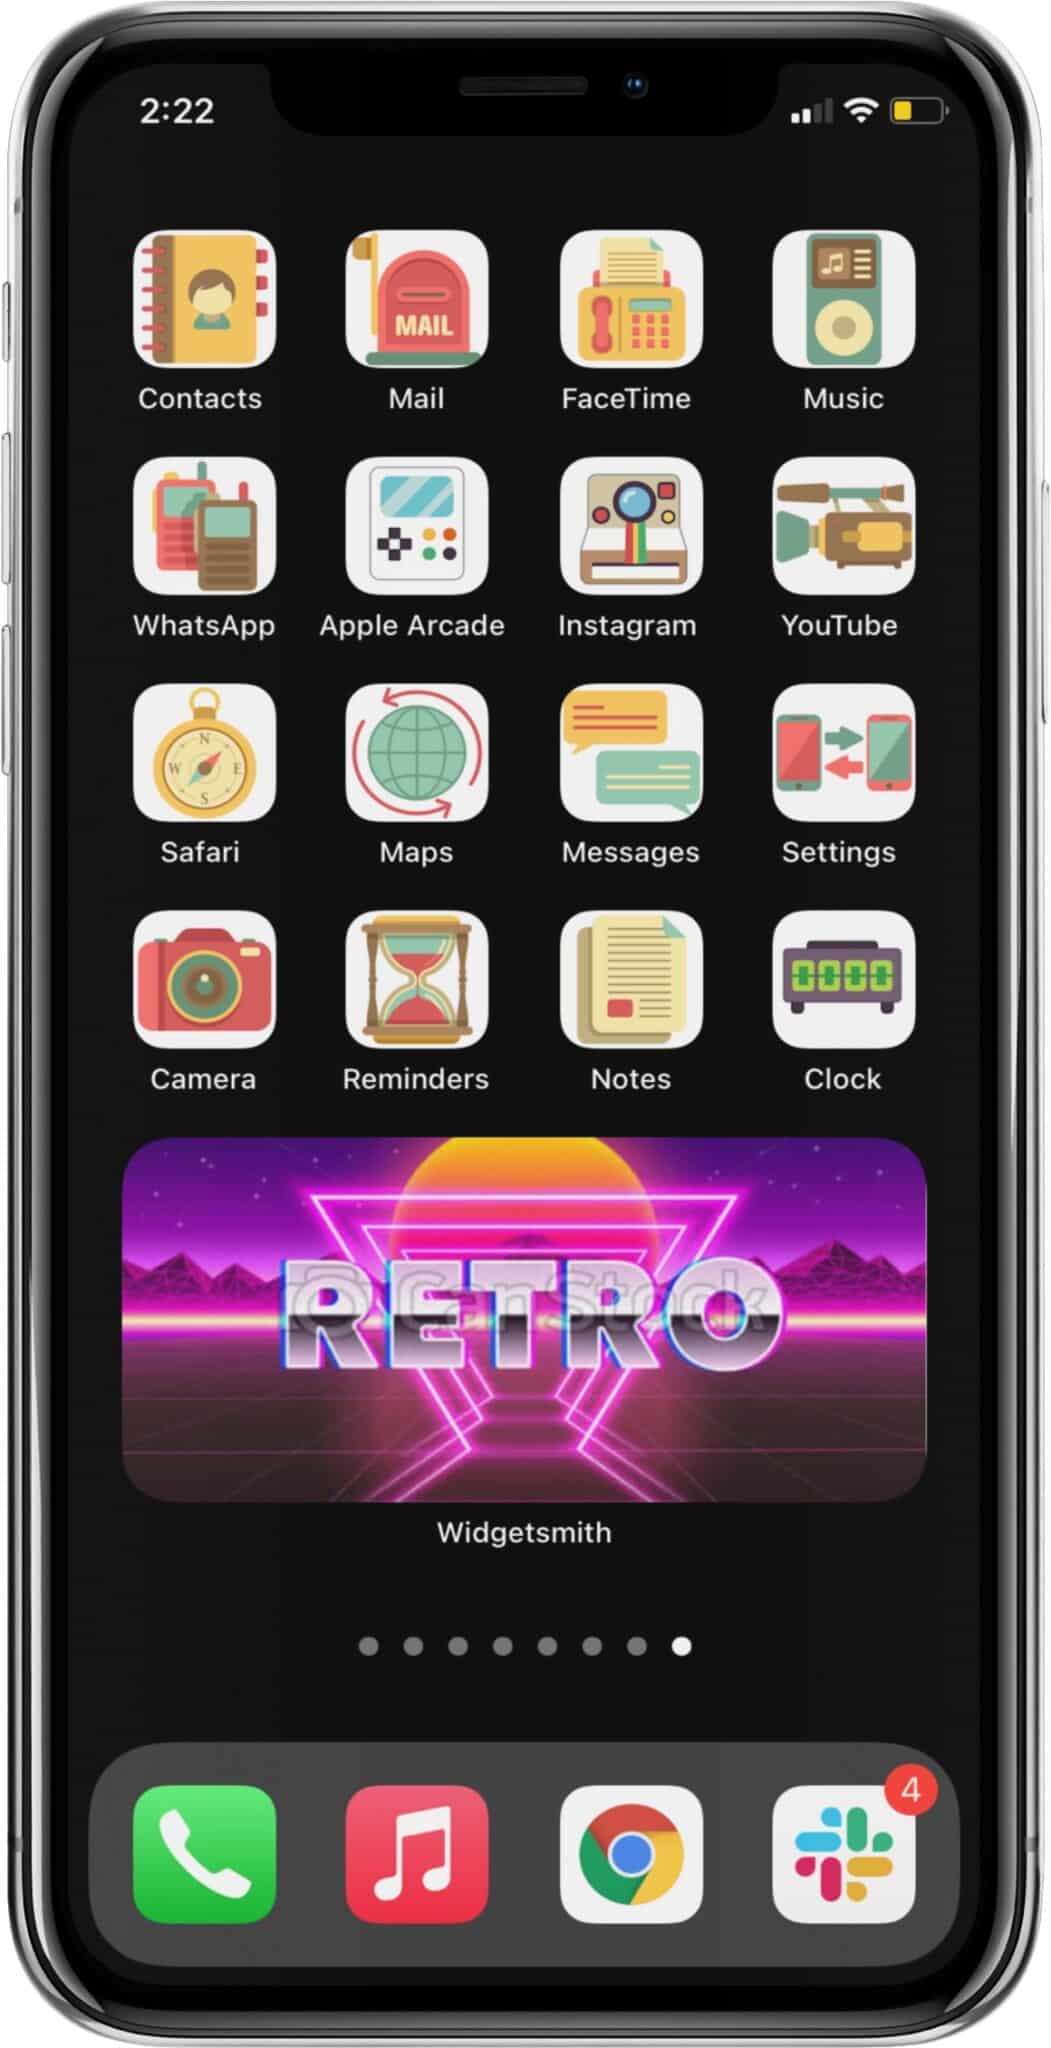 retro aesthetic app icon set for iphone runnng ios 14